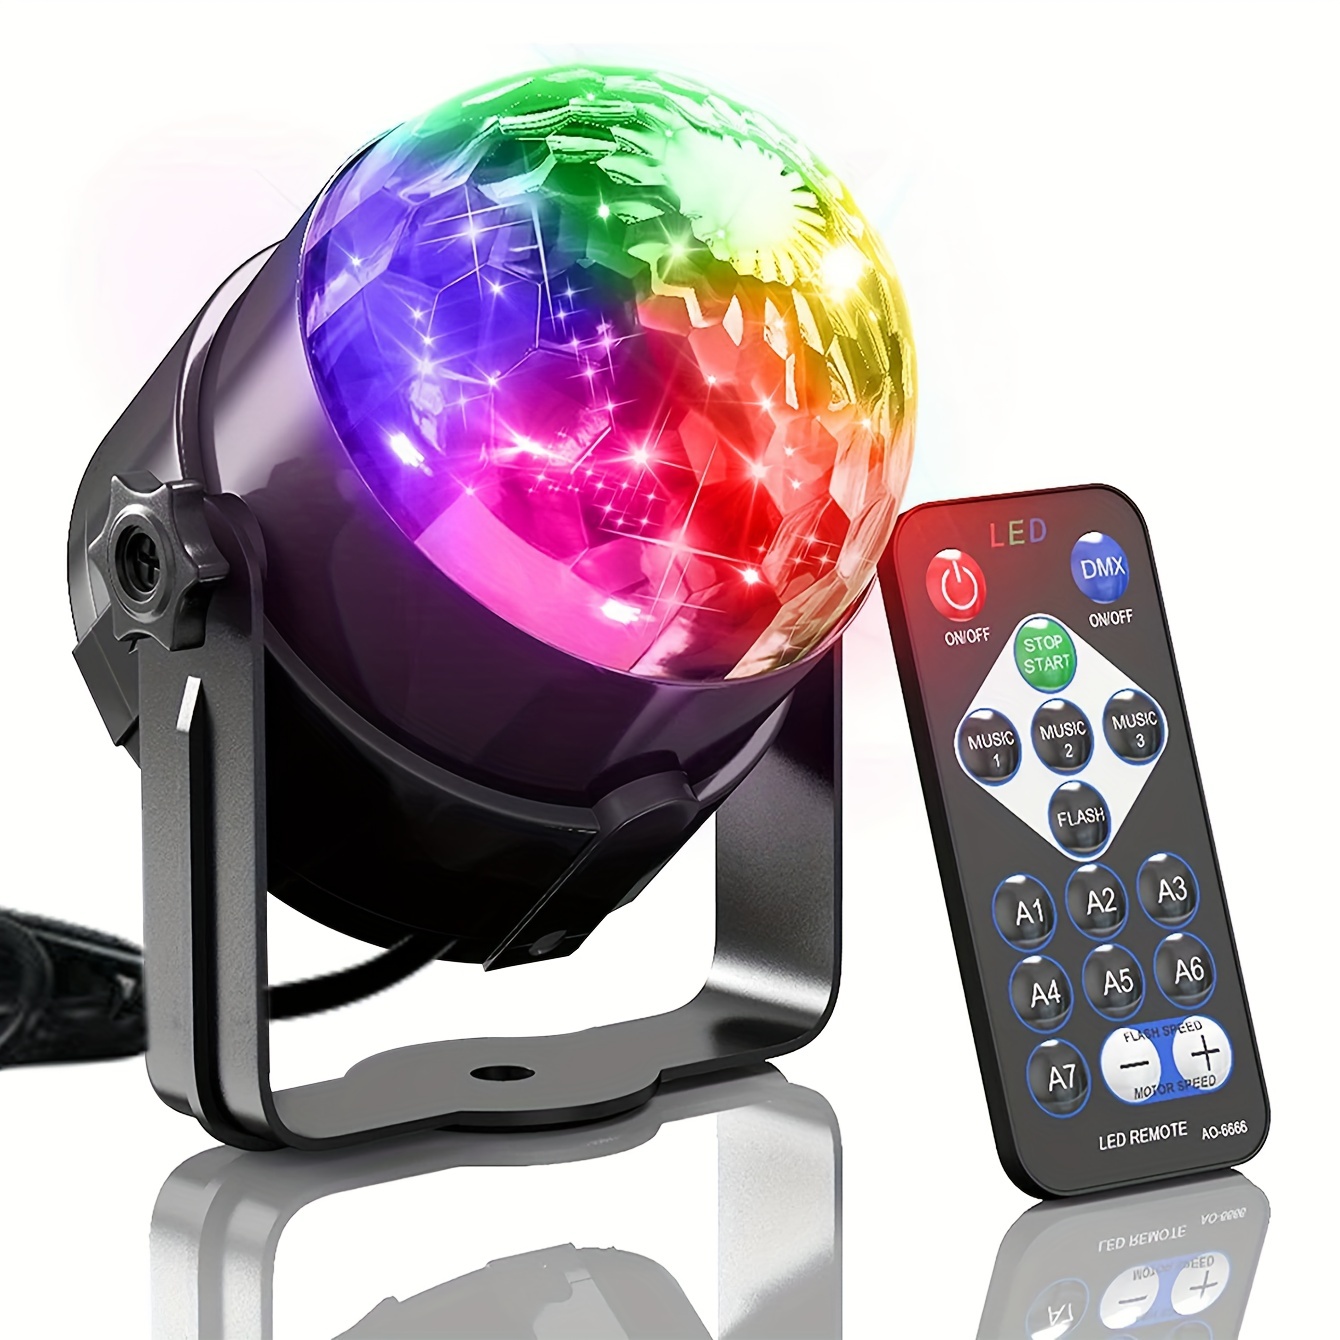 

1pc Abs Crystal Remote Control Magic Ball Light, 7 Color Flashing Stage Light With Remote Control Bracket, Remote Control Color Change, Cold Dance Table Light, Color Flashing Projection Light